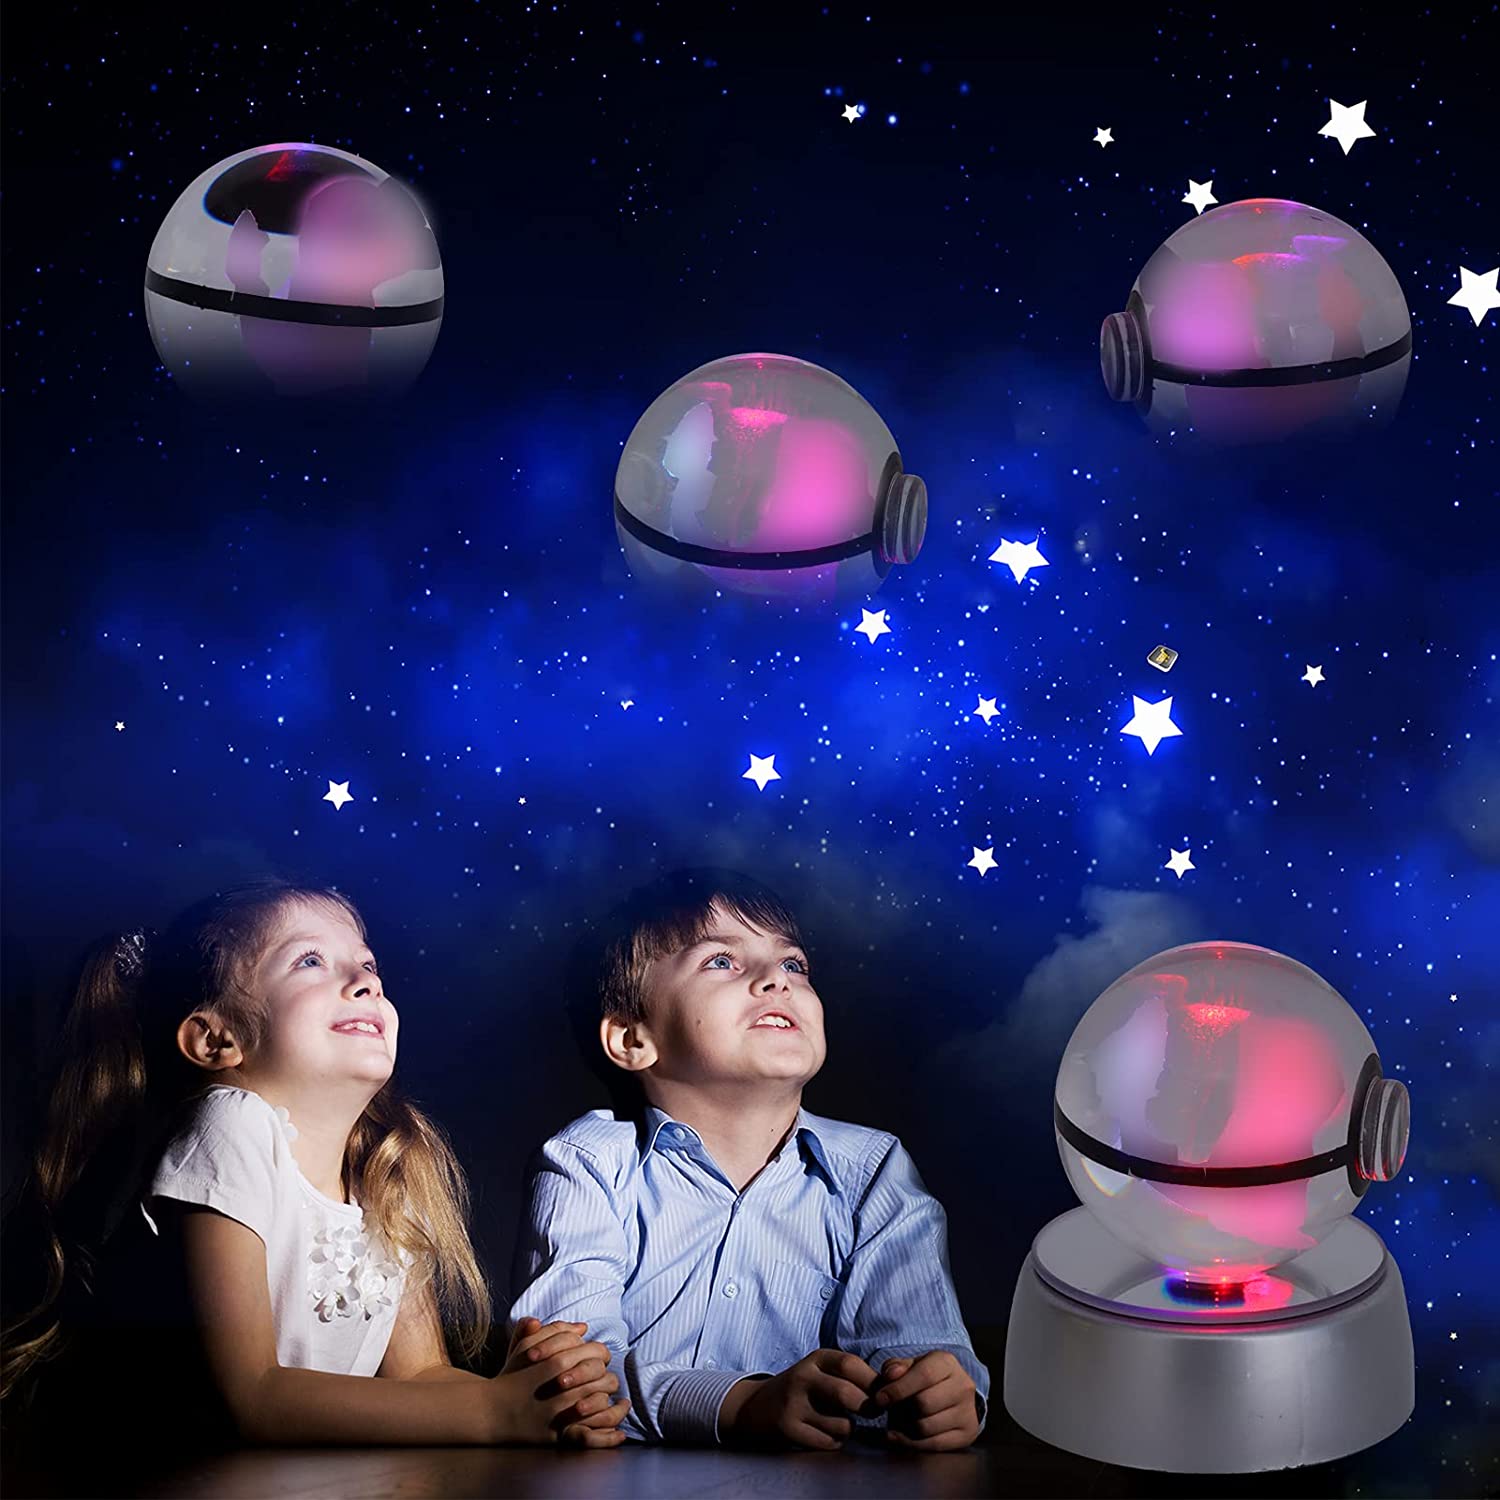 50882 - SJQWZRY 3D Crystal Ball LED Night Light Base Changes Color Toy Night Light Child Anytime Present (Char-mander) USA